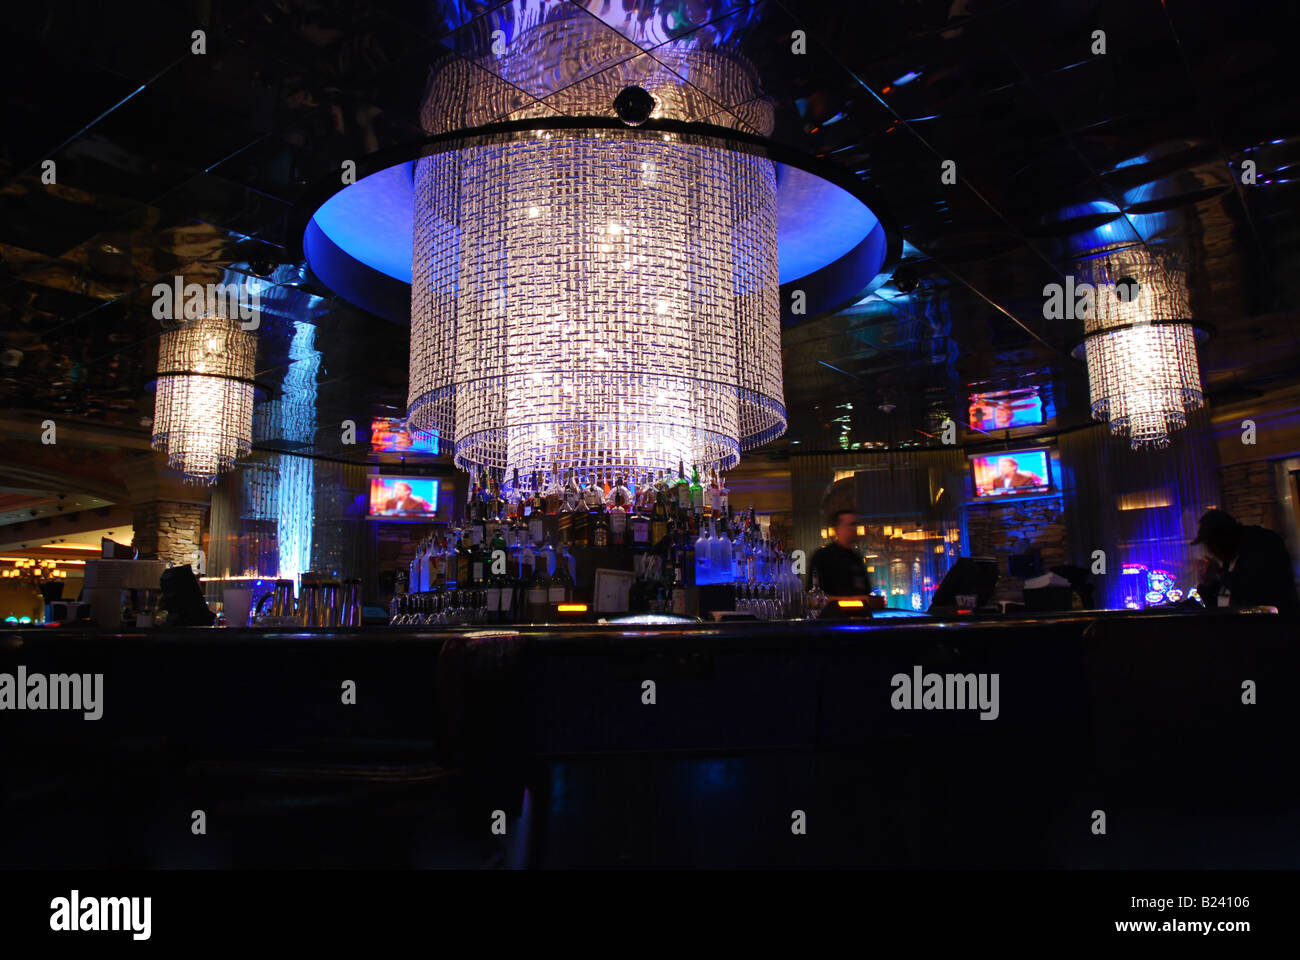 Elegant nightclub in a casino with blue lighting and glistening chandeliers  Stock Photo - Alamy